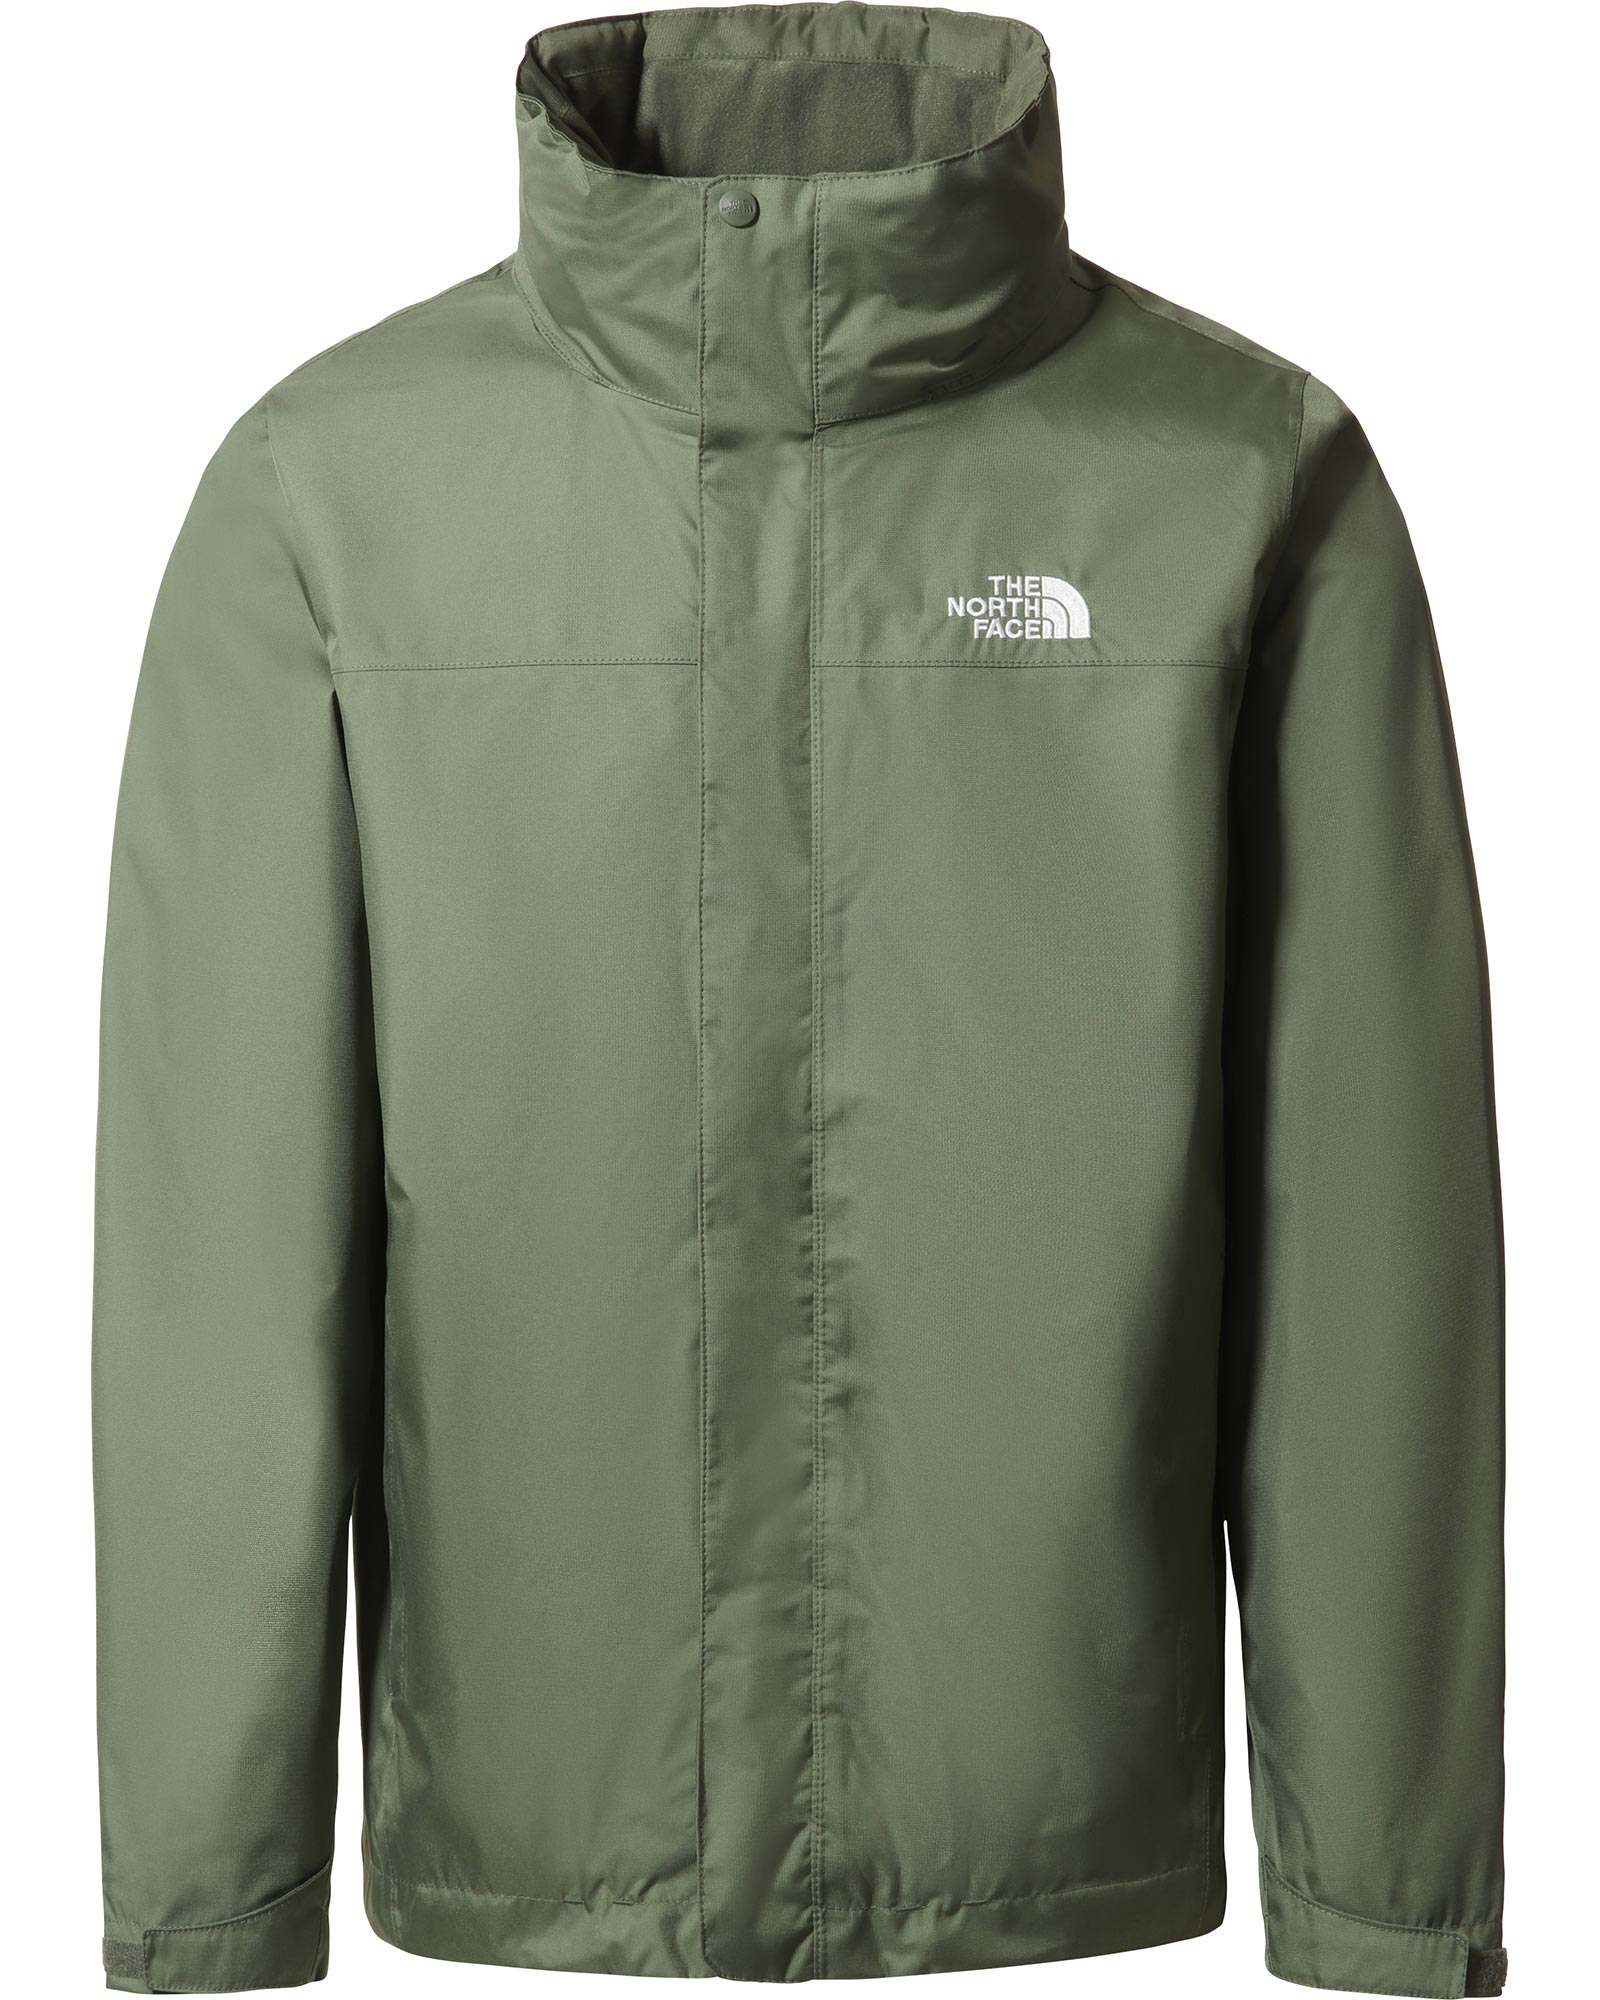 The North Face Evolve Triclimate Men’s Jacket - Thyme Green XXL